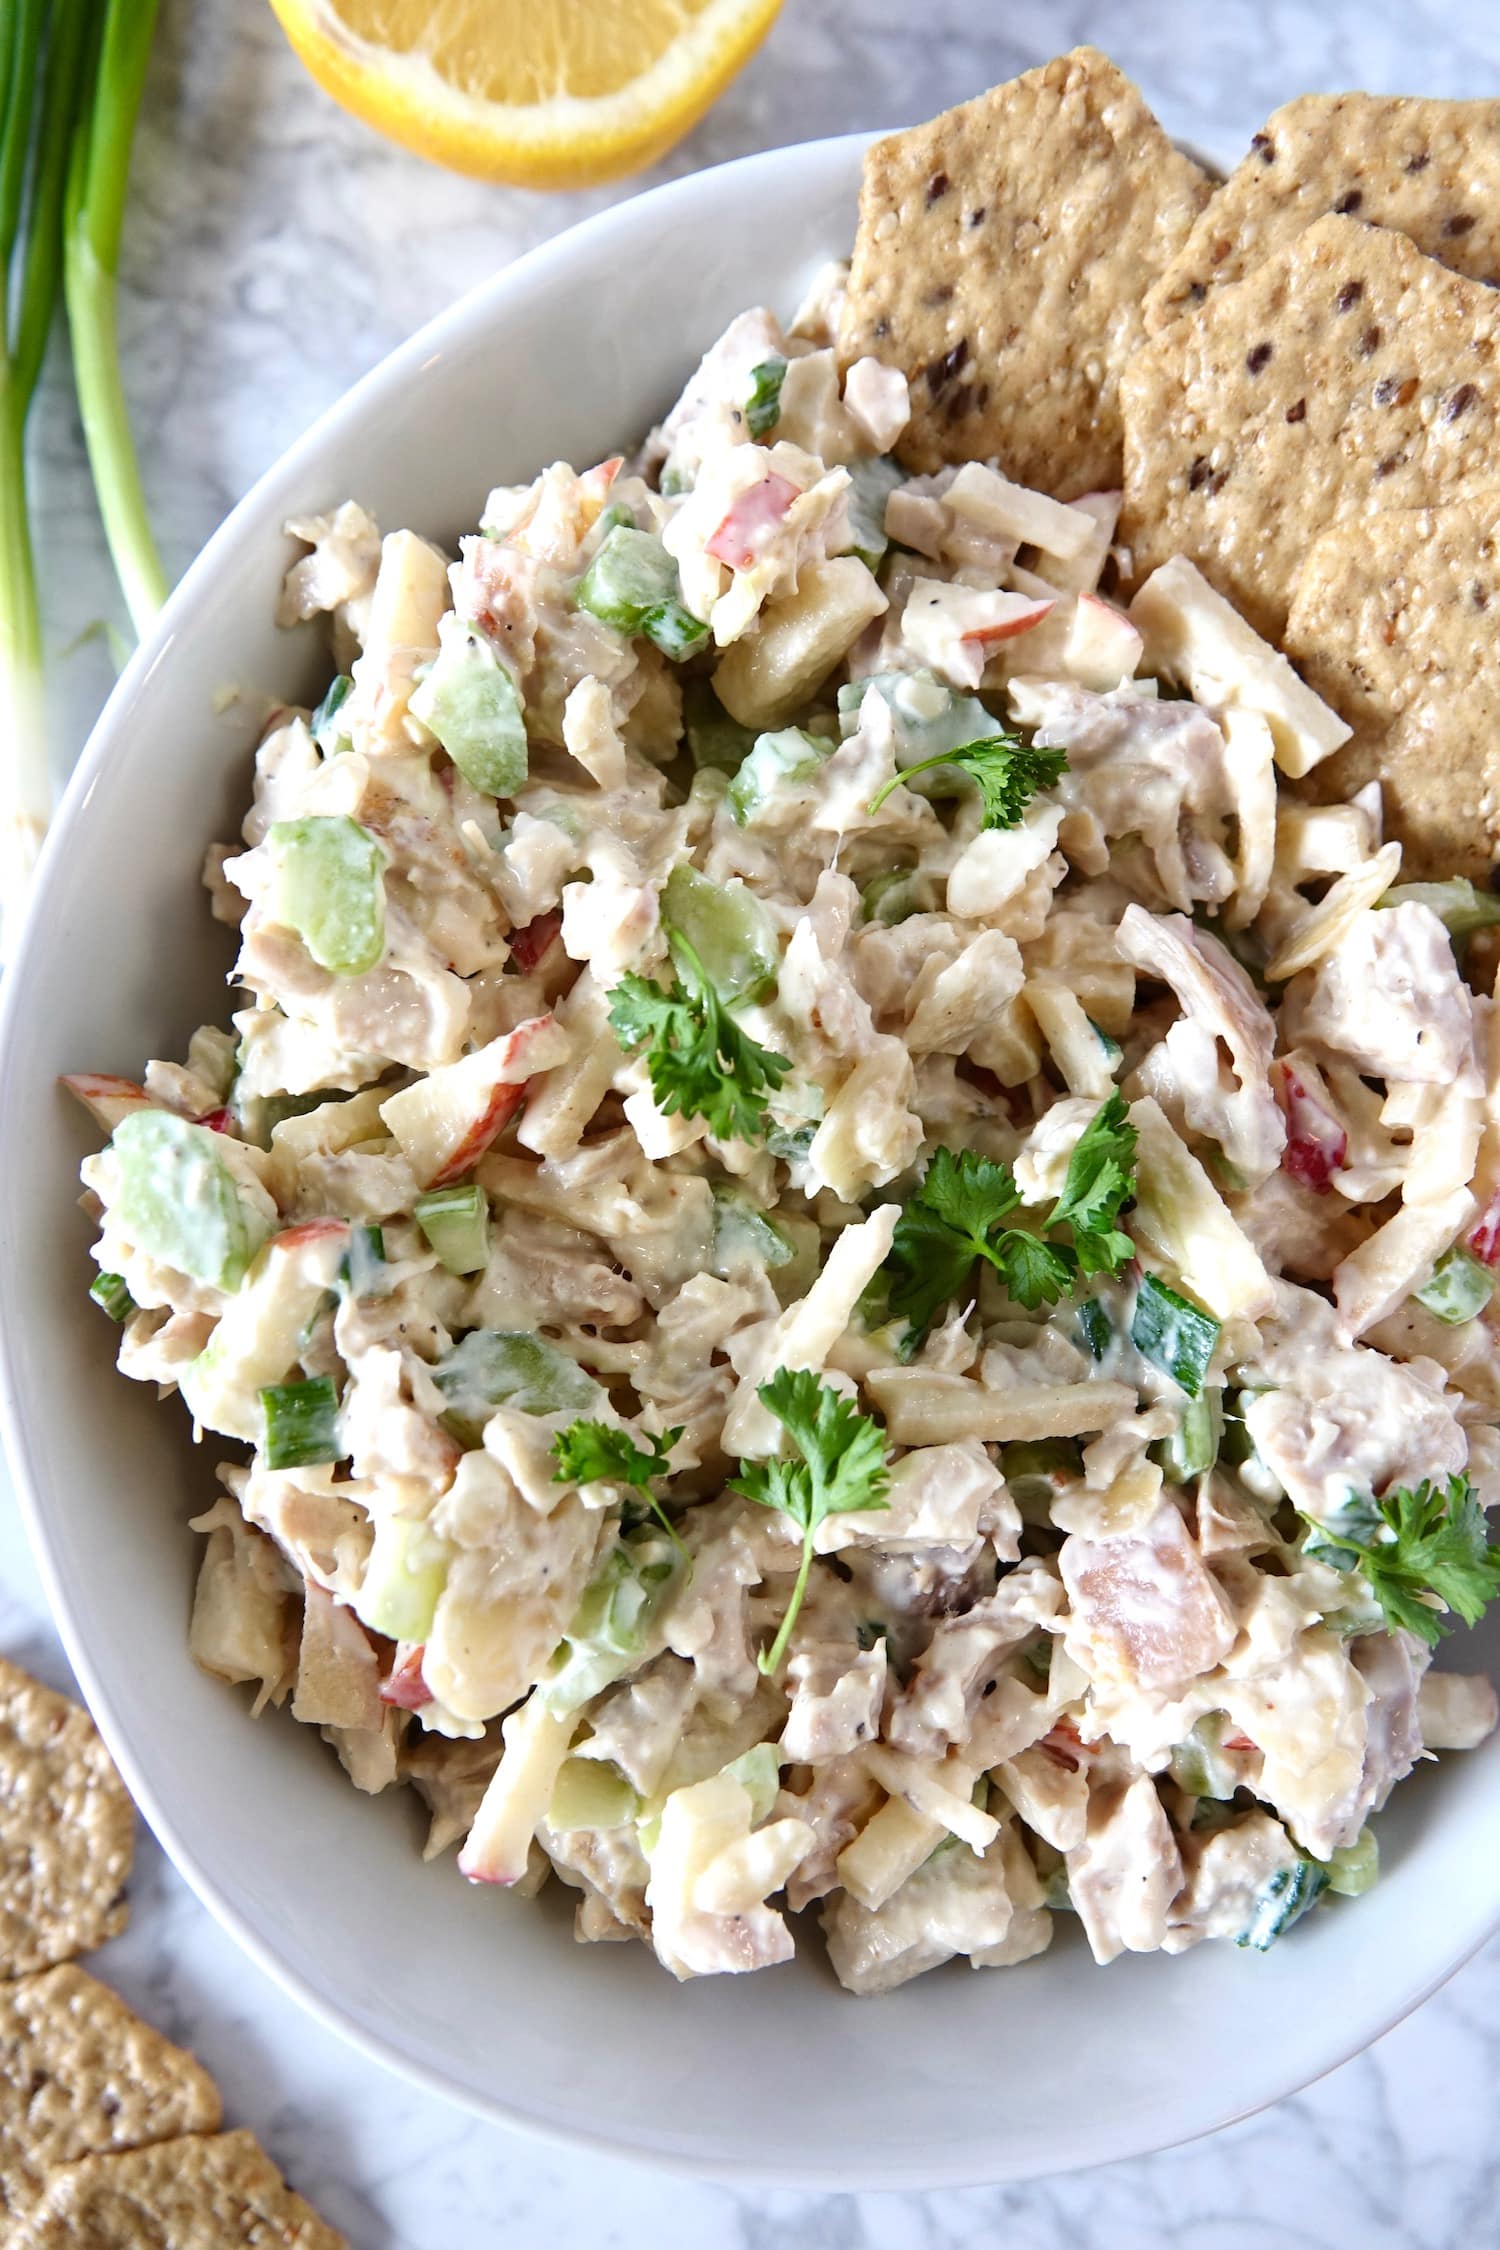 Chicken salad mixture in a white bowl with seed crackers, garnished with lemon, green onion and parsley.